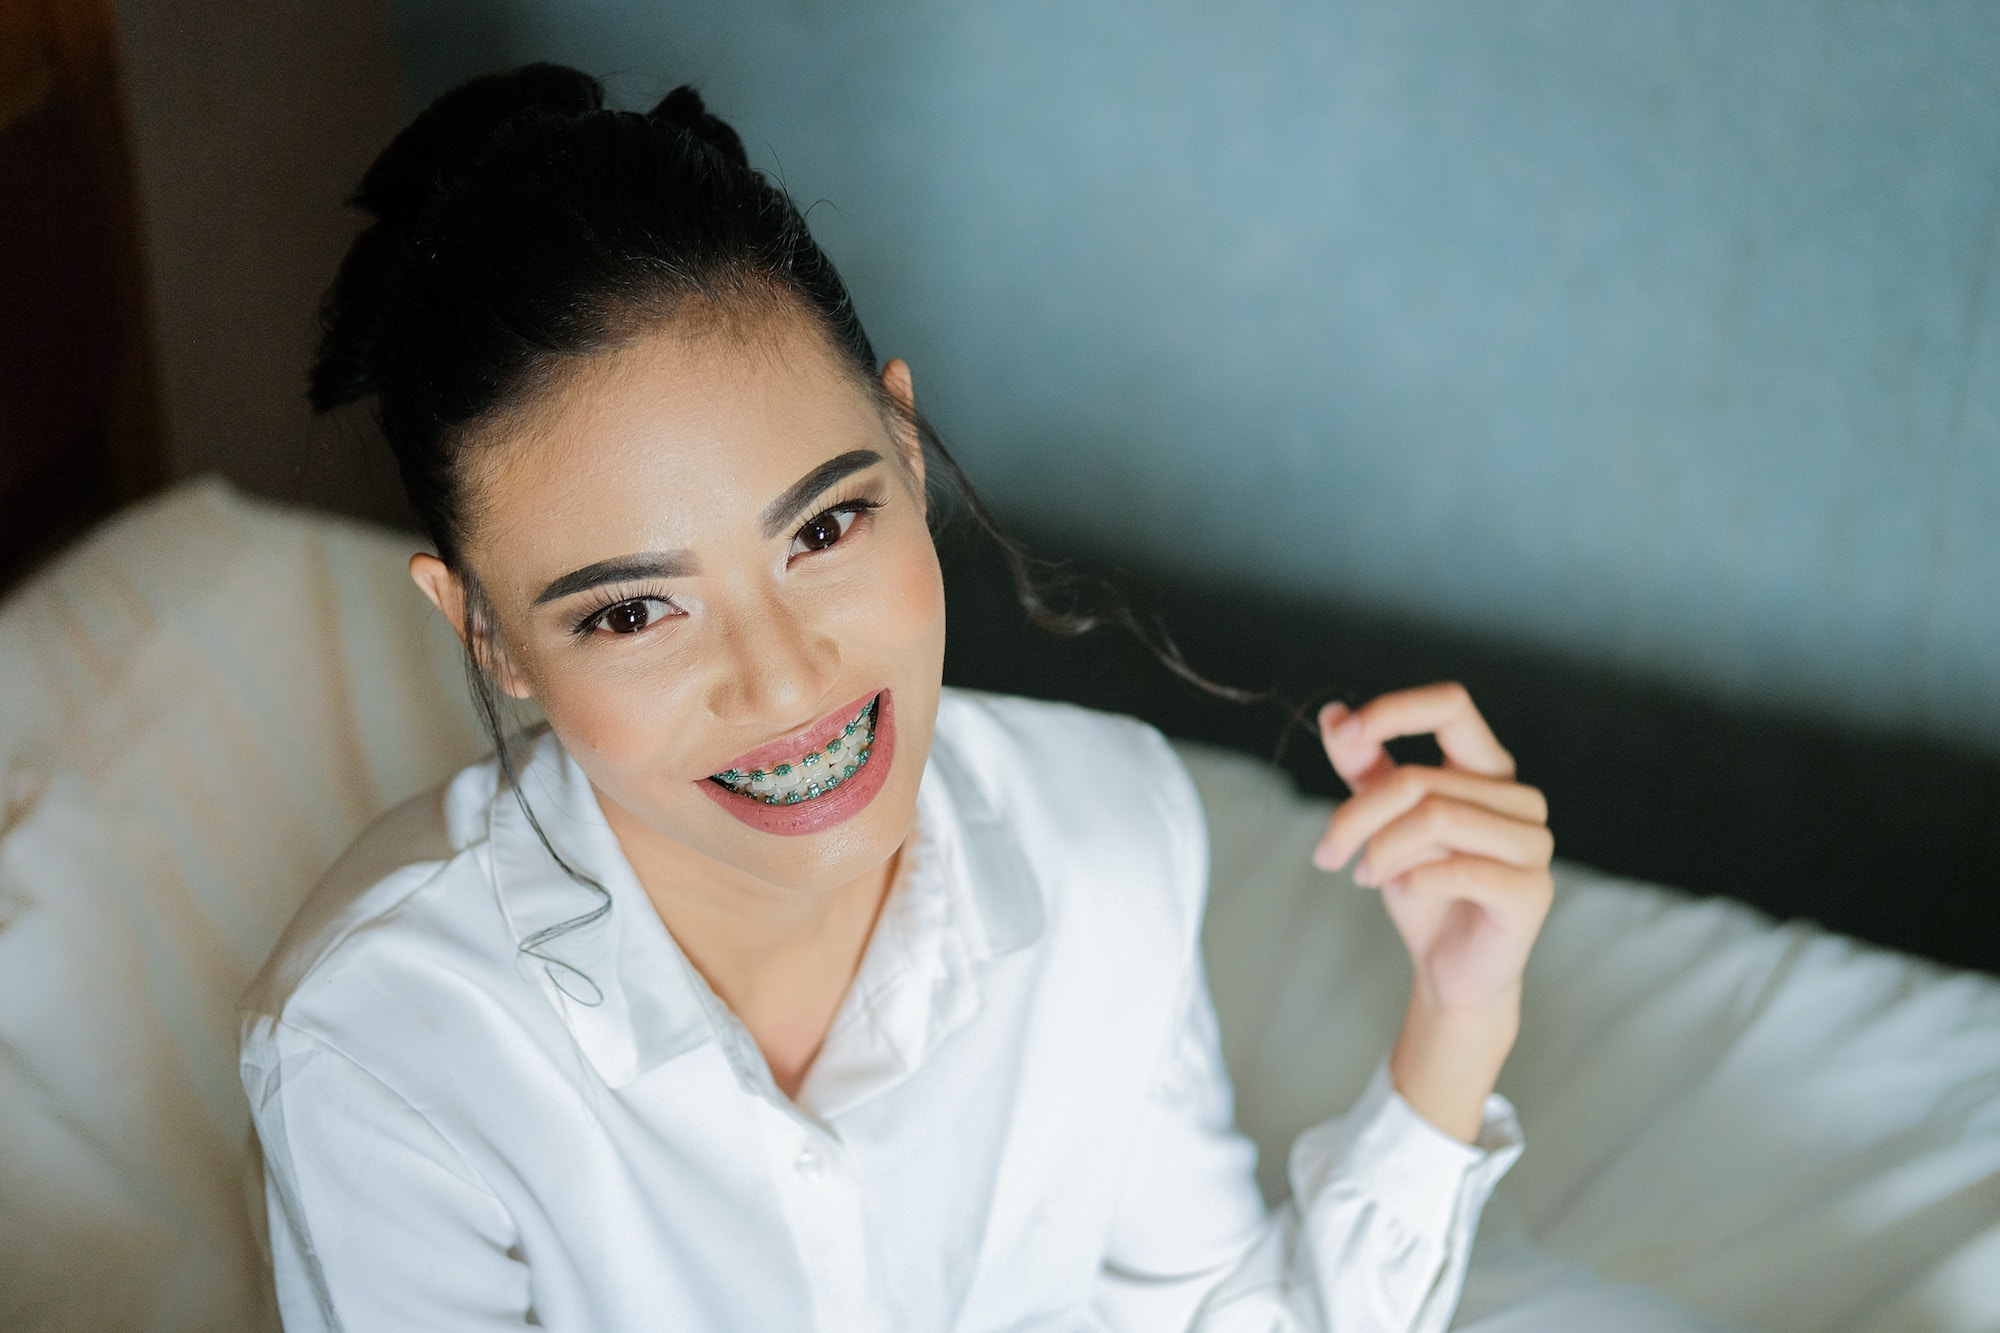 where can you buy orthodontic rubber bands